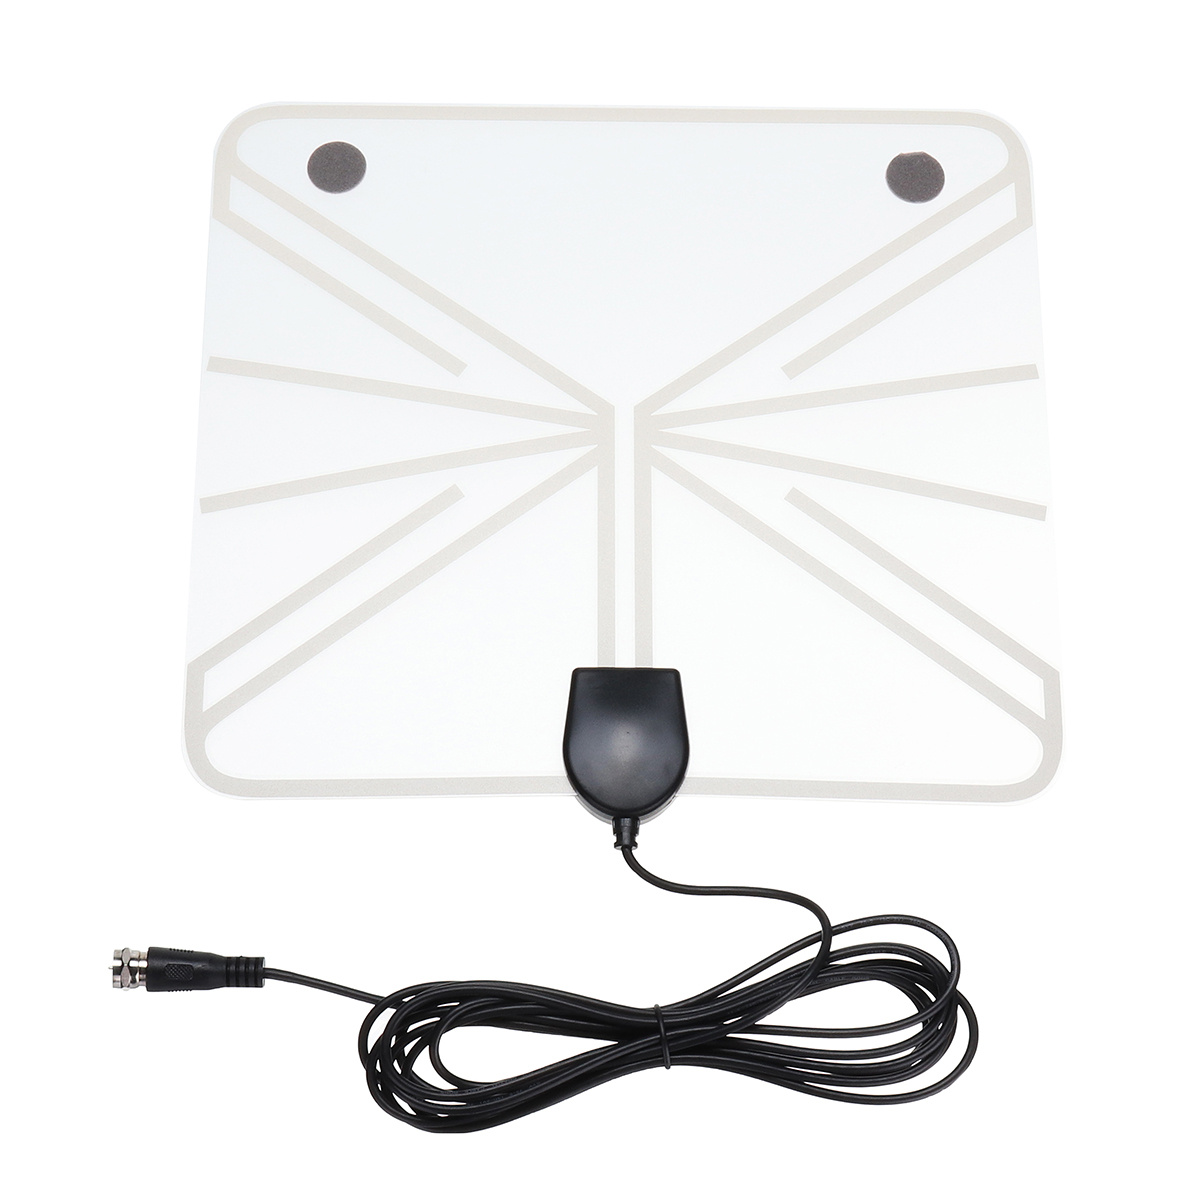 

Universal ATSC USB HD Digital TV Antenna 50-100 Miles HD with HDTV Amplifier Signal Booster for Indoor